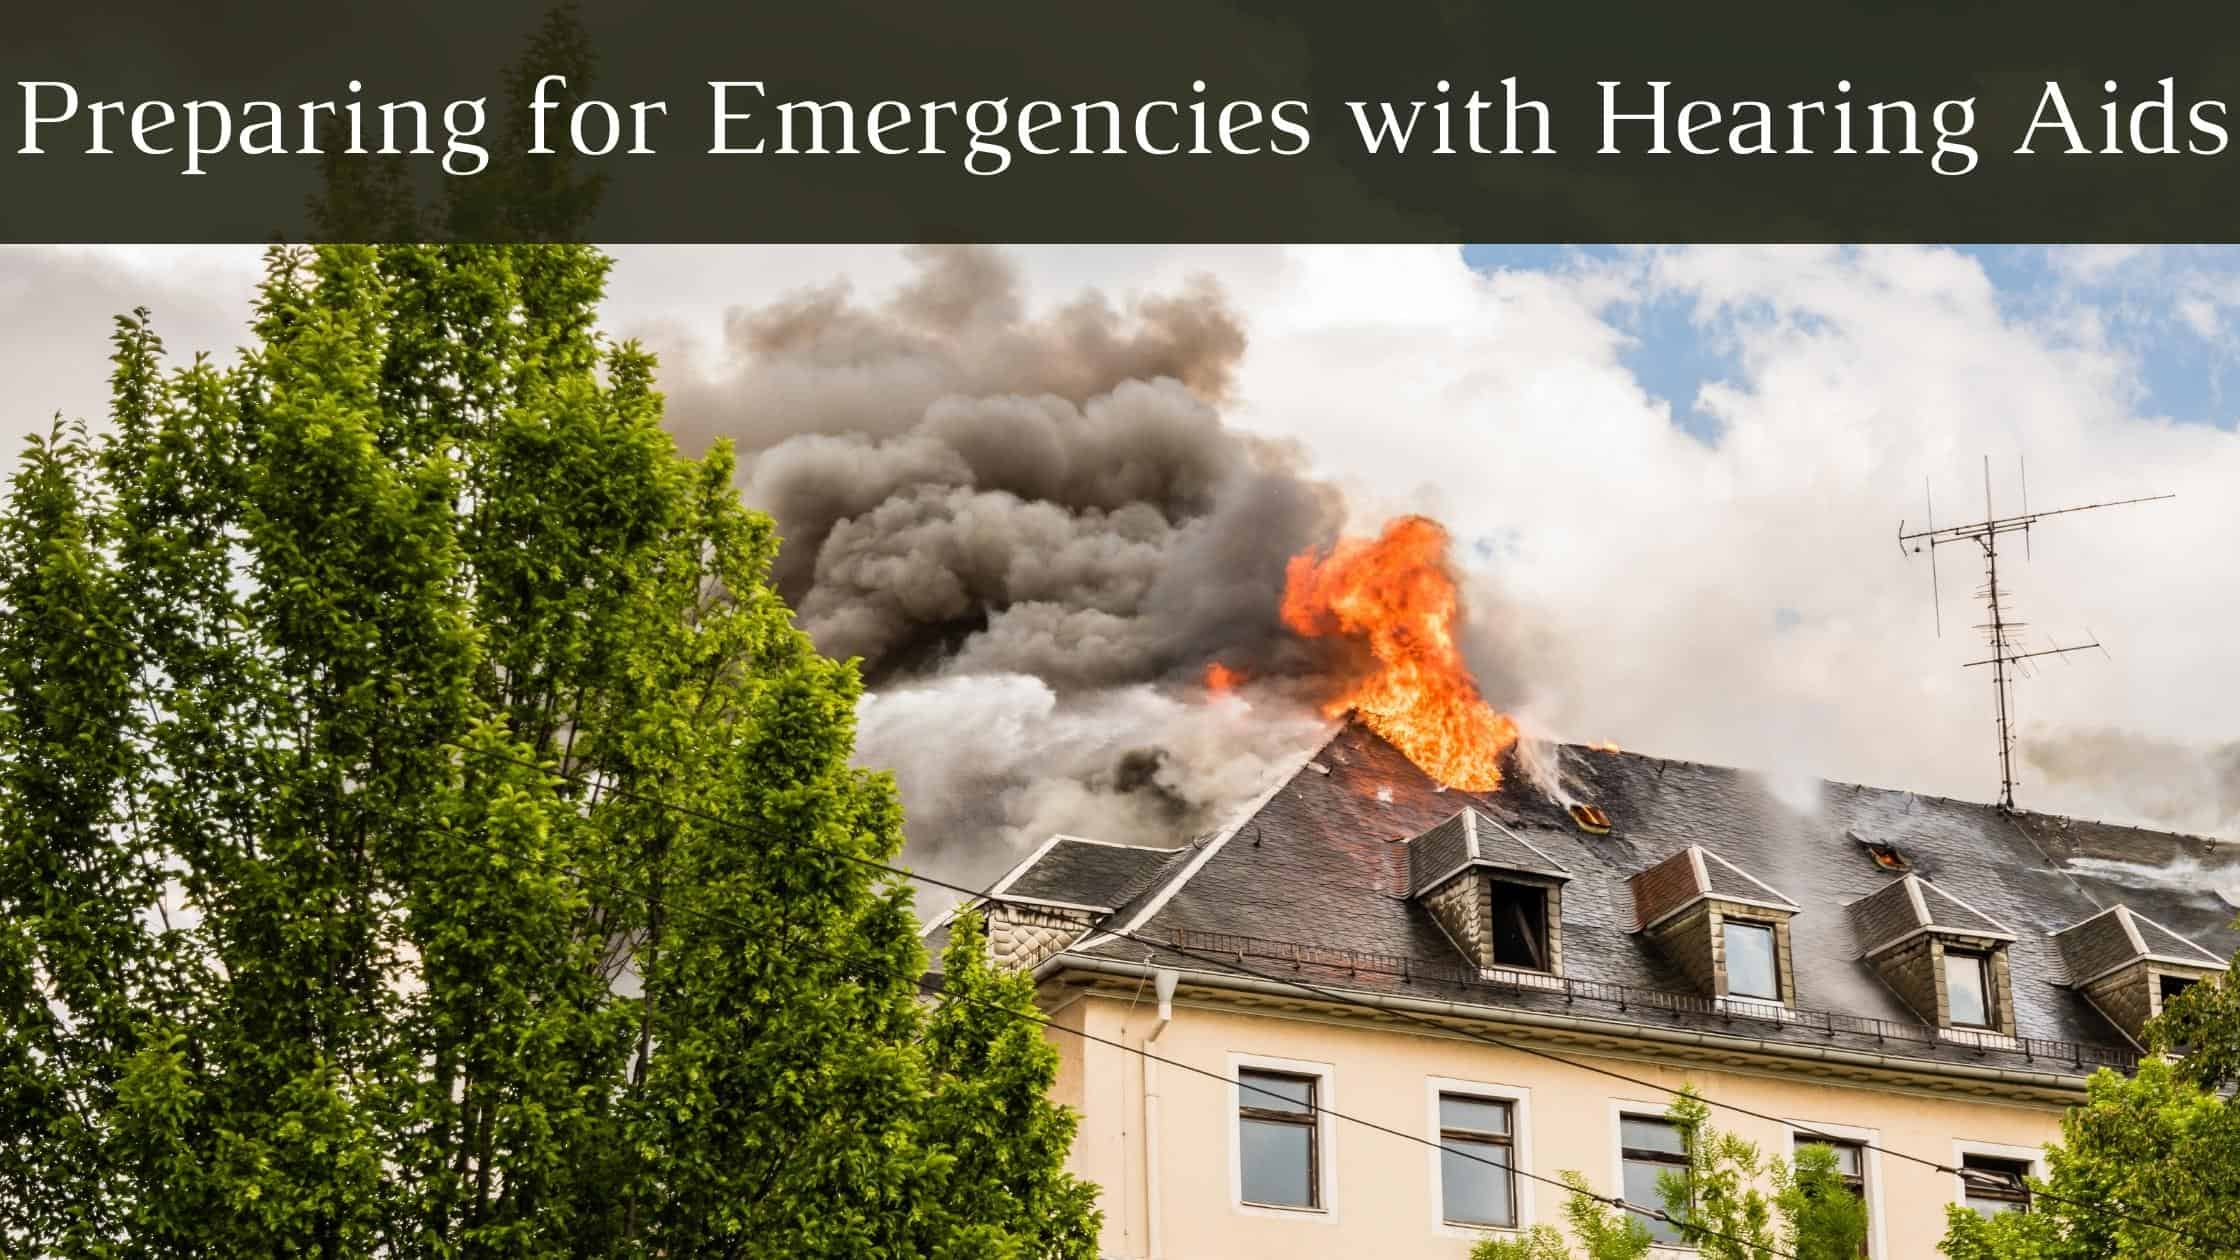 Featured image for “Preparing for Emergencies with Hearing Aids”